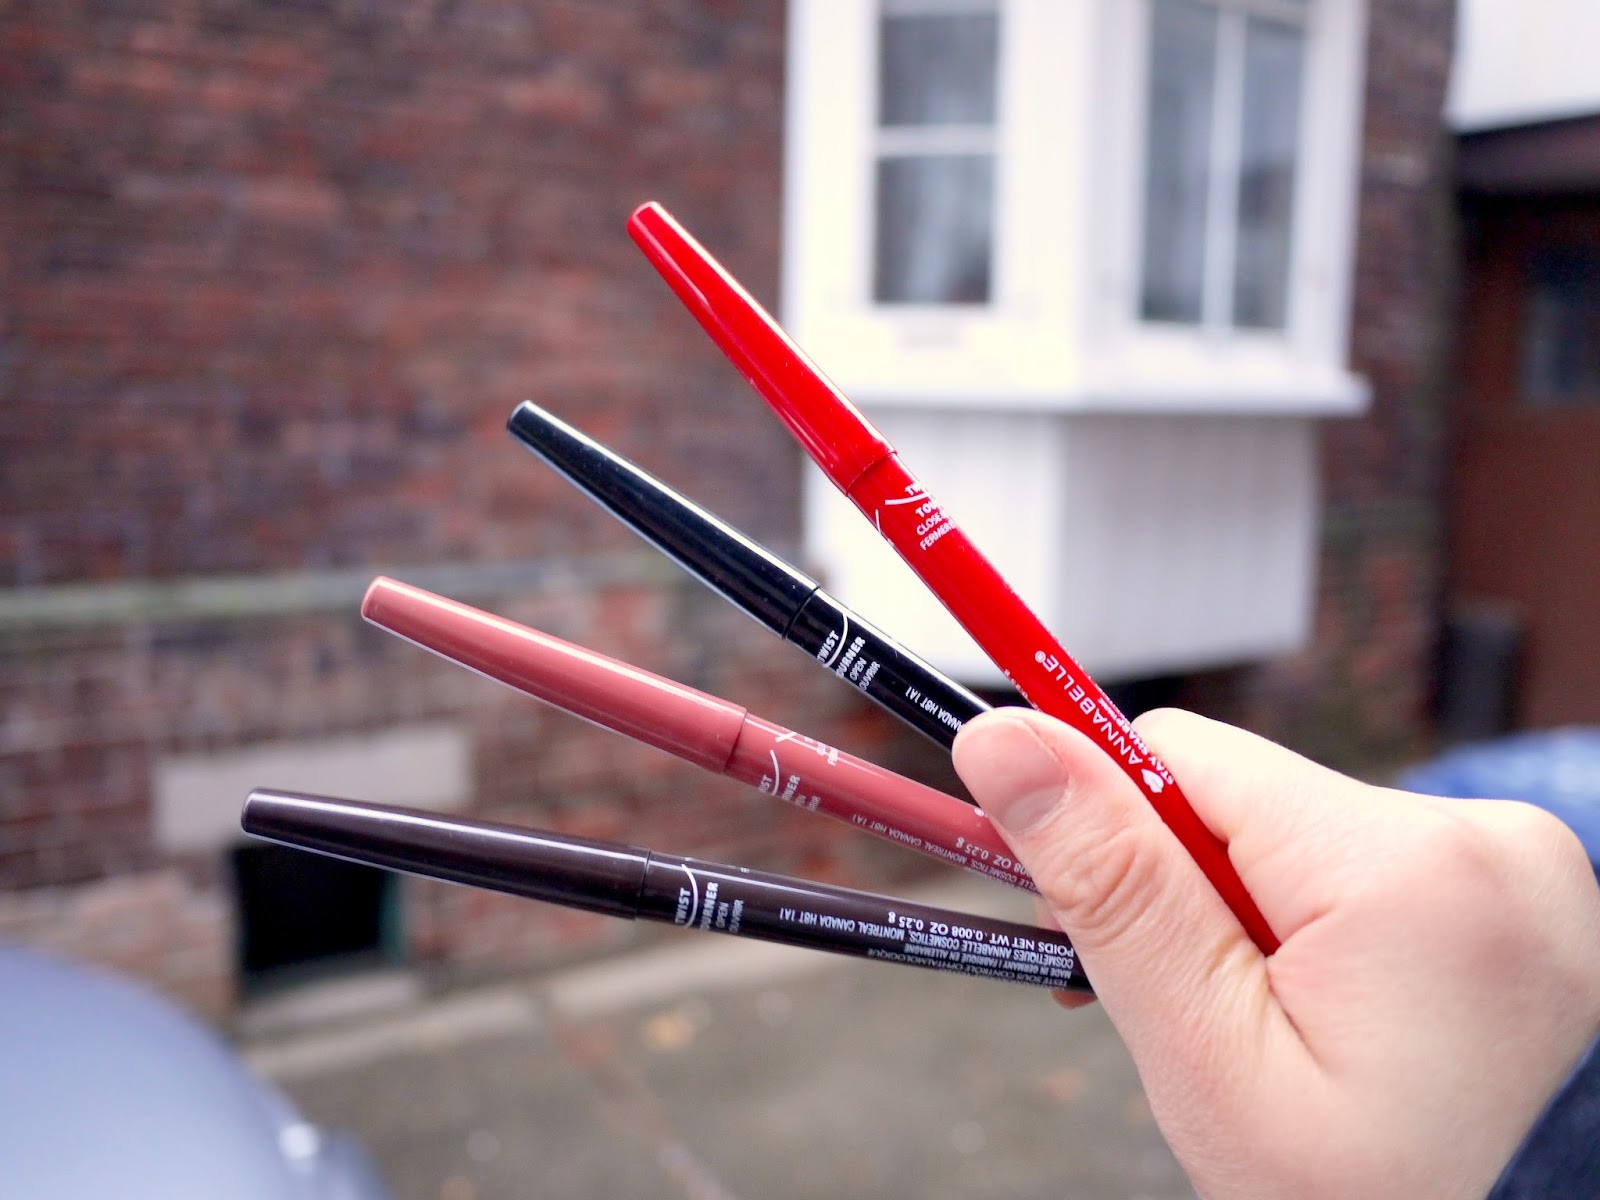 Annabelle Stay Sharp Waterproof liners java go black cappucino glam red review swatch